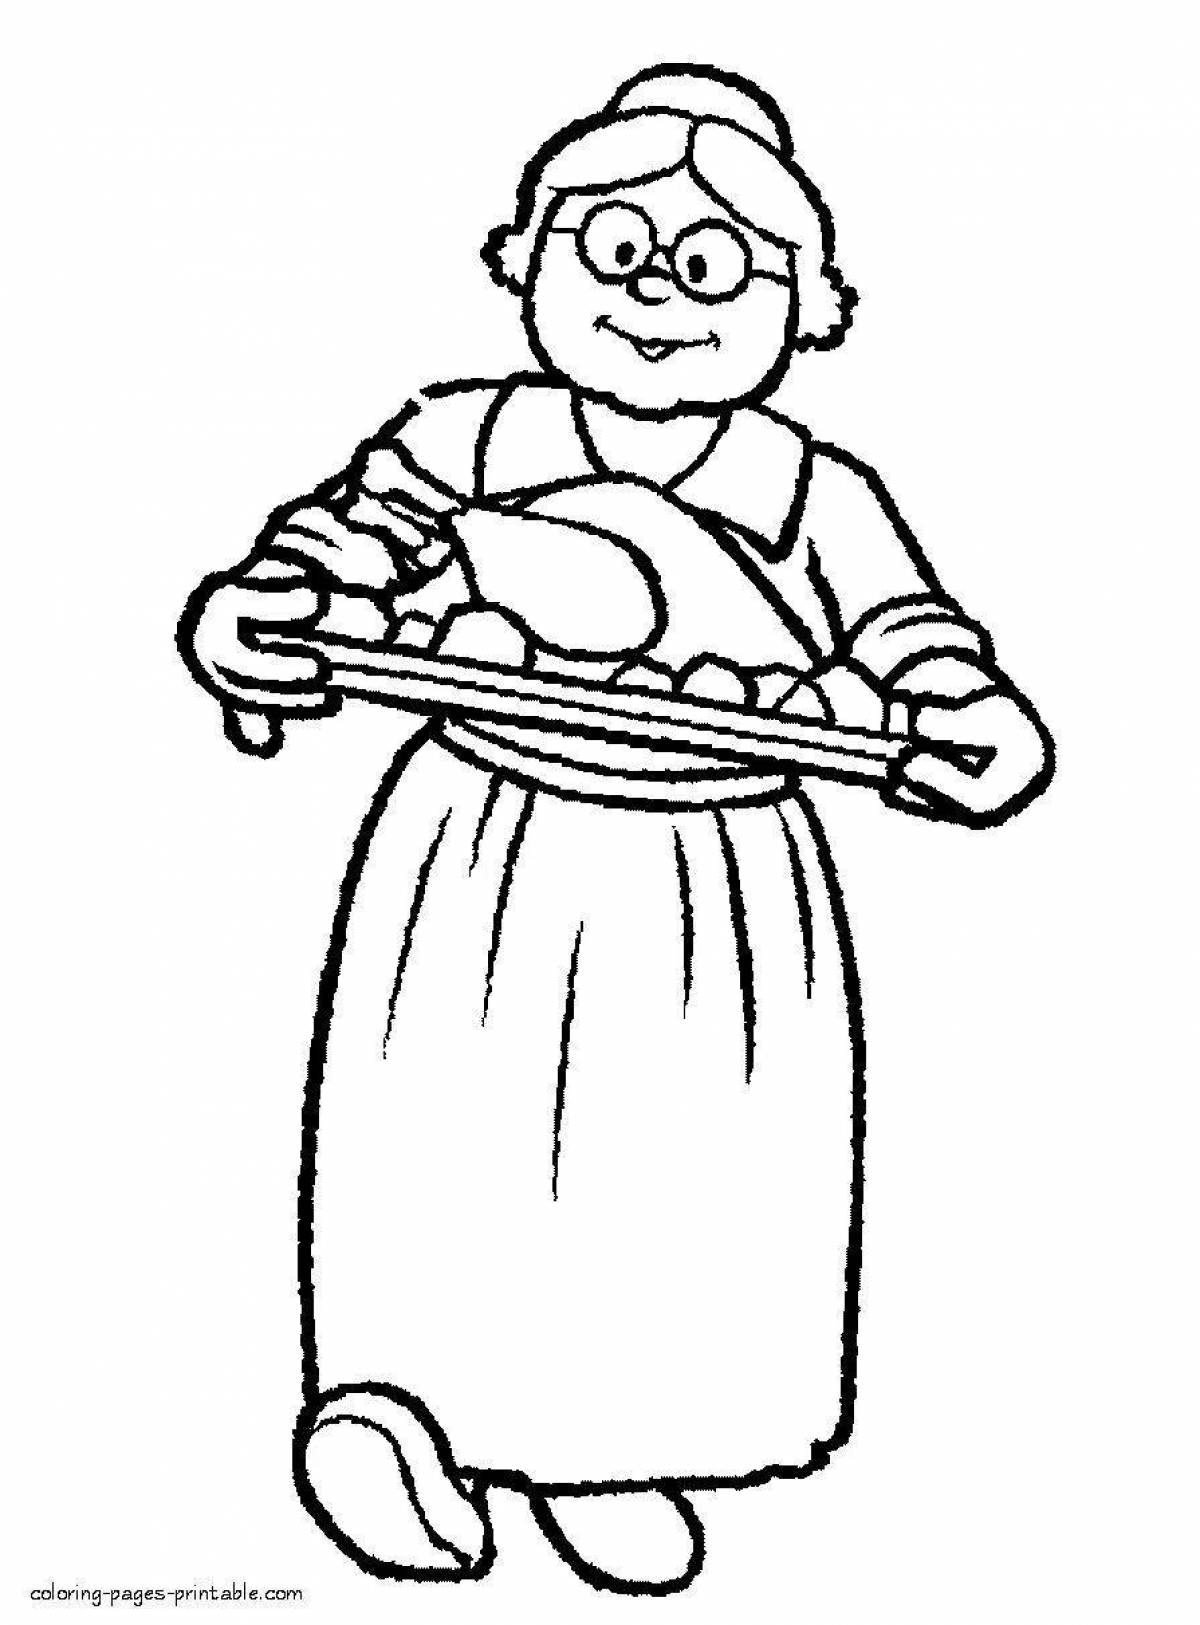 Coloring book wise grandmother